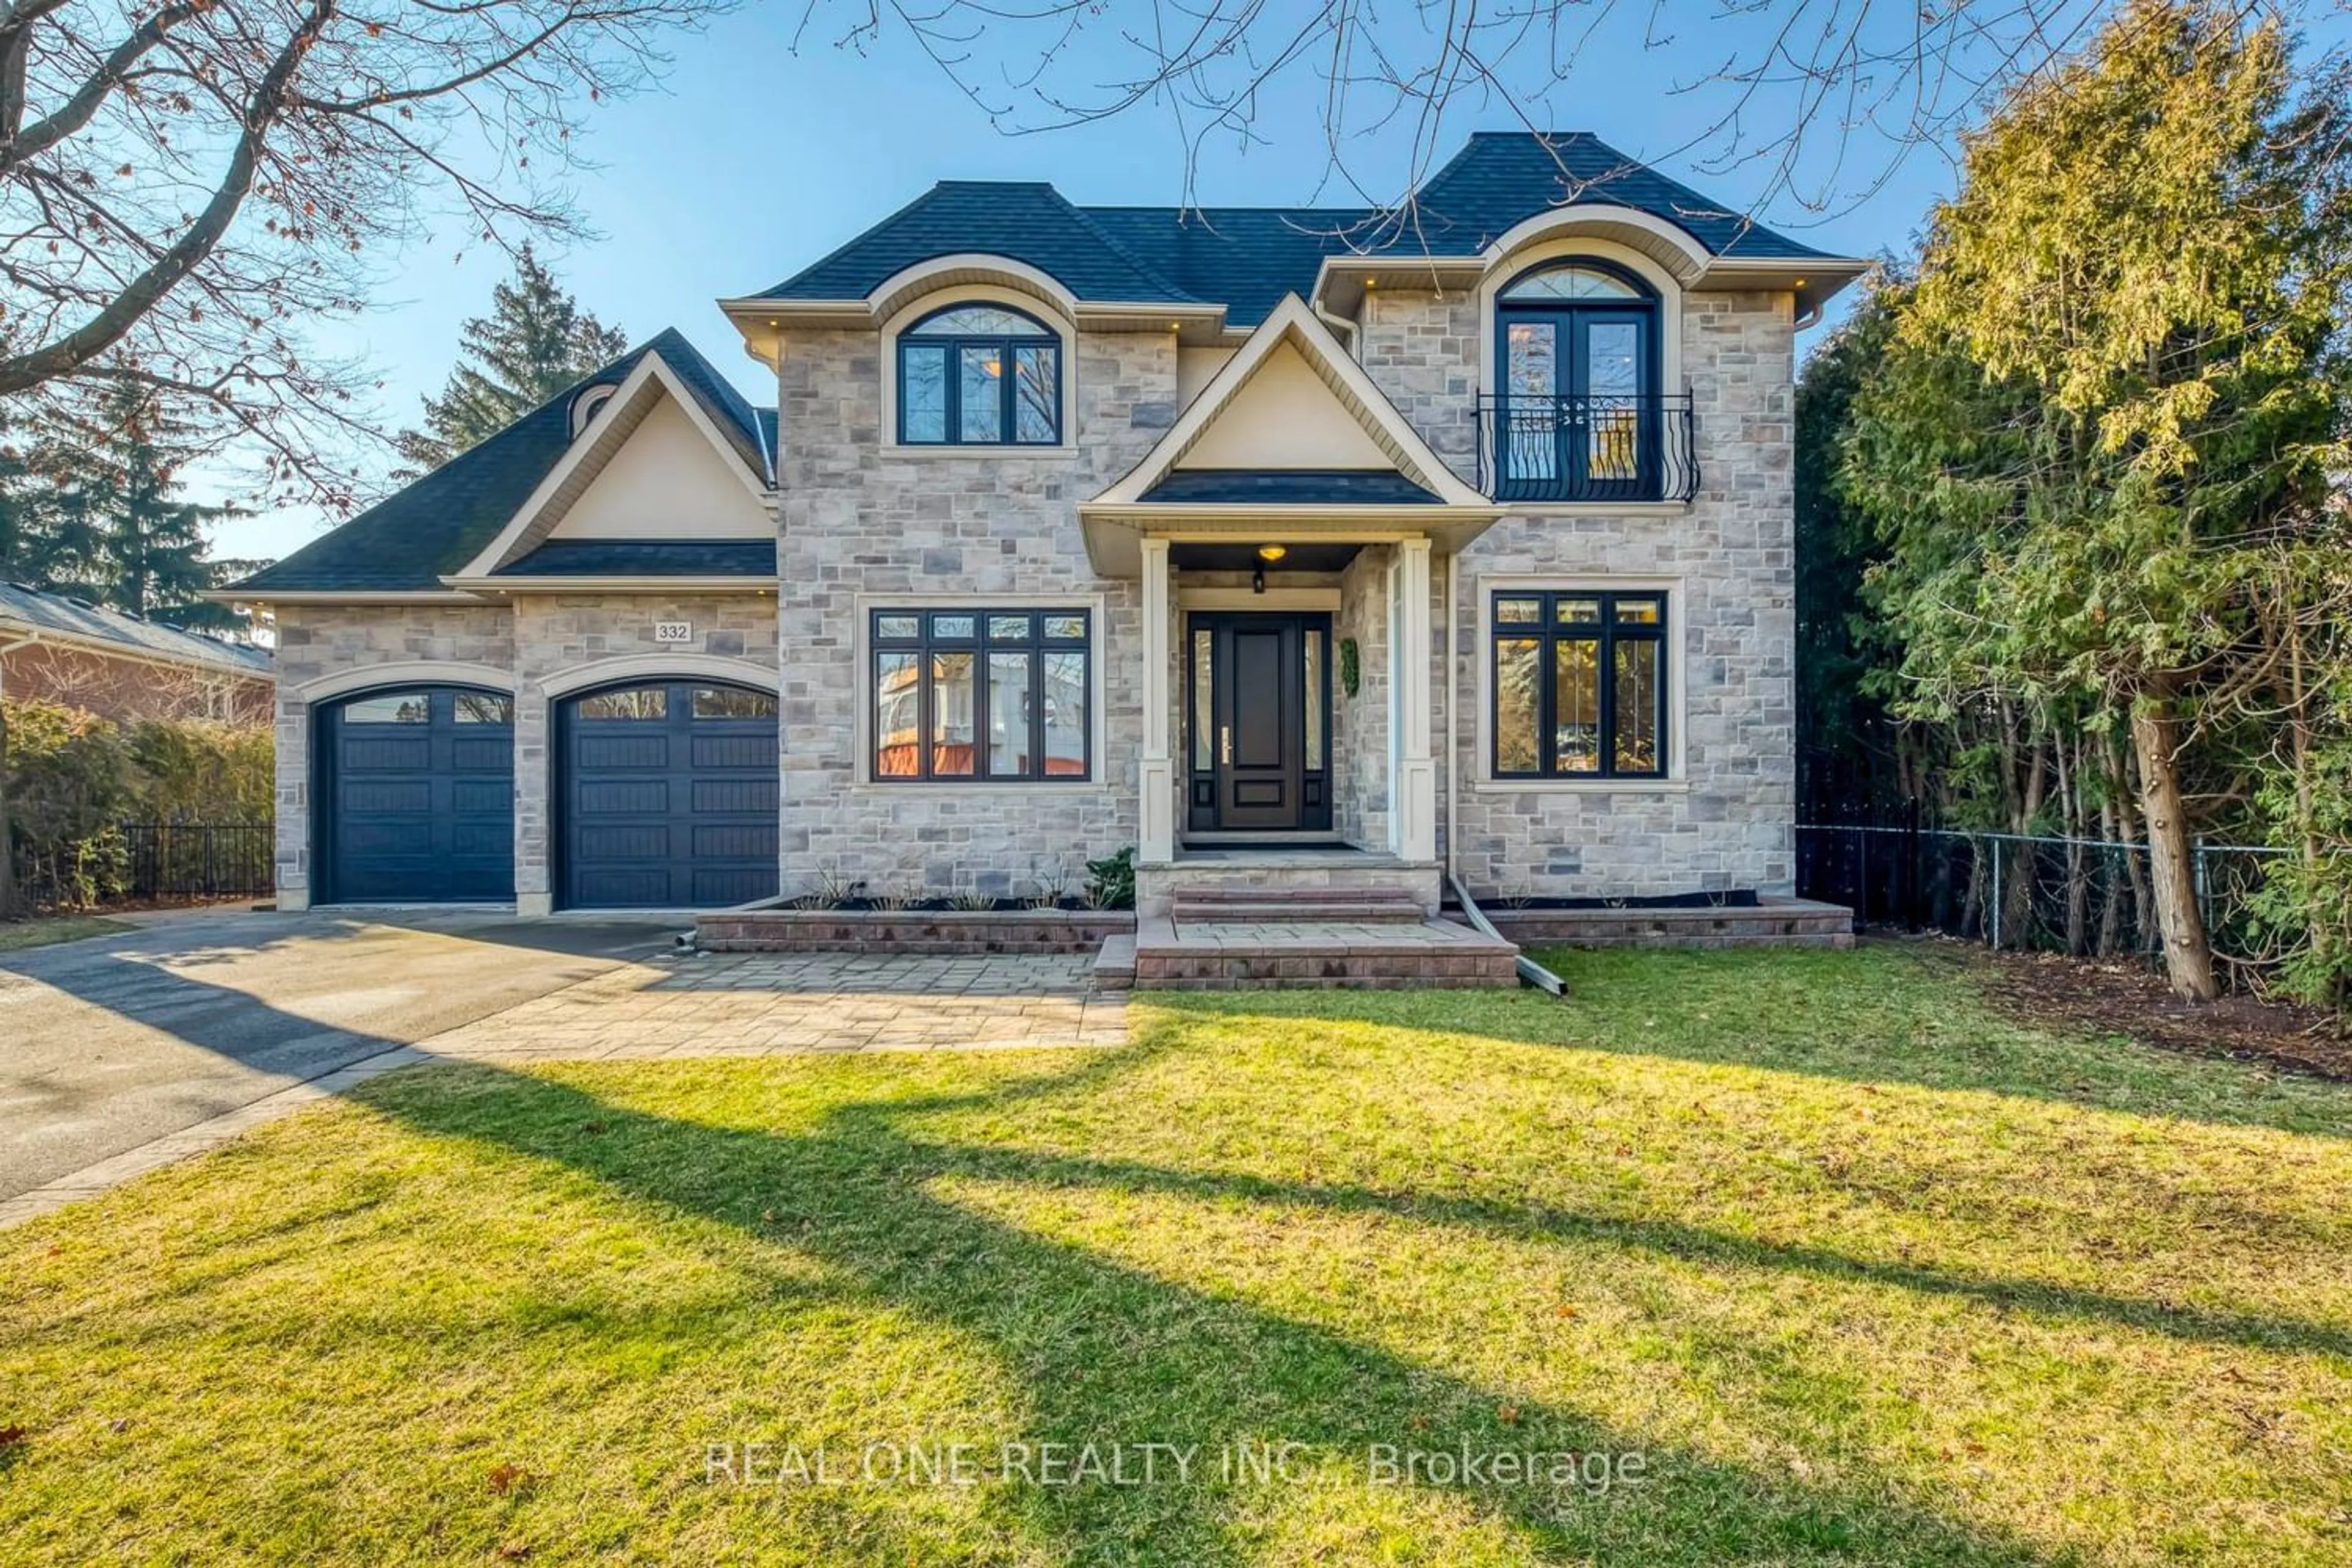 Home with brick exterior material for 332 Sawyer Rd, Oakville Ontario L6L 3N7